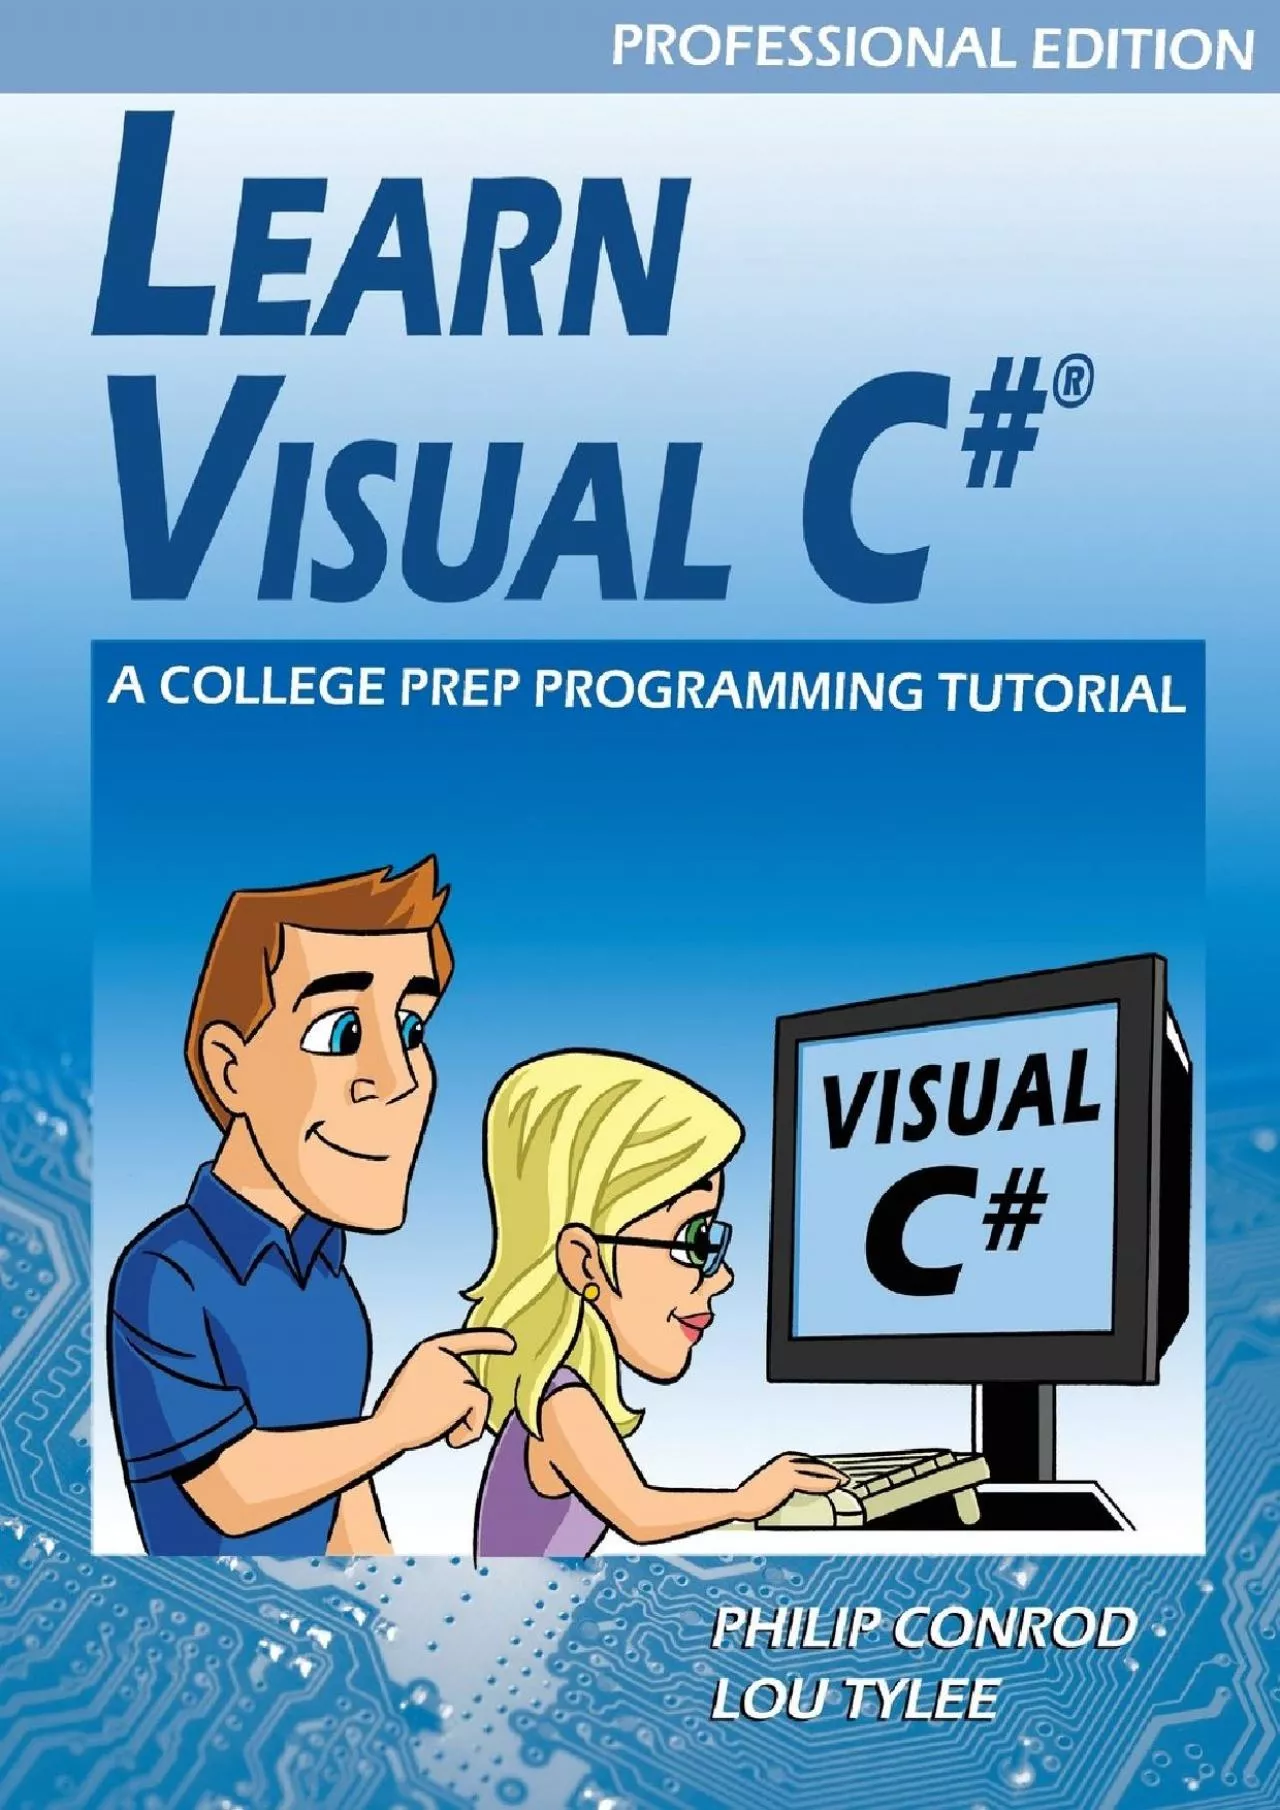 [READING BOOK]-Learn Visual C Professional Edition - A College Prep Programming Tutorial